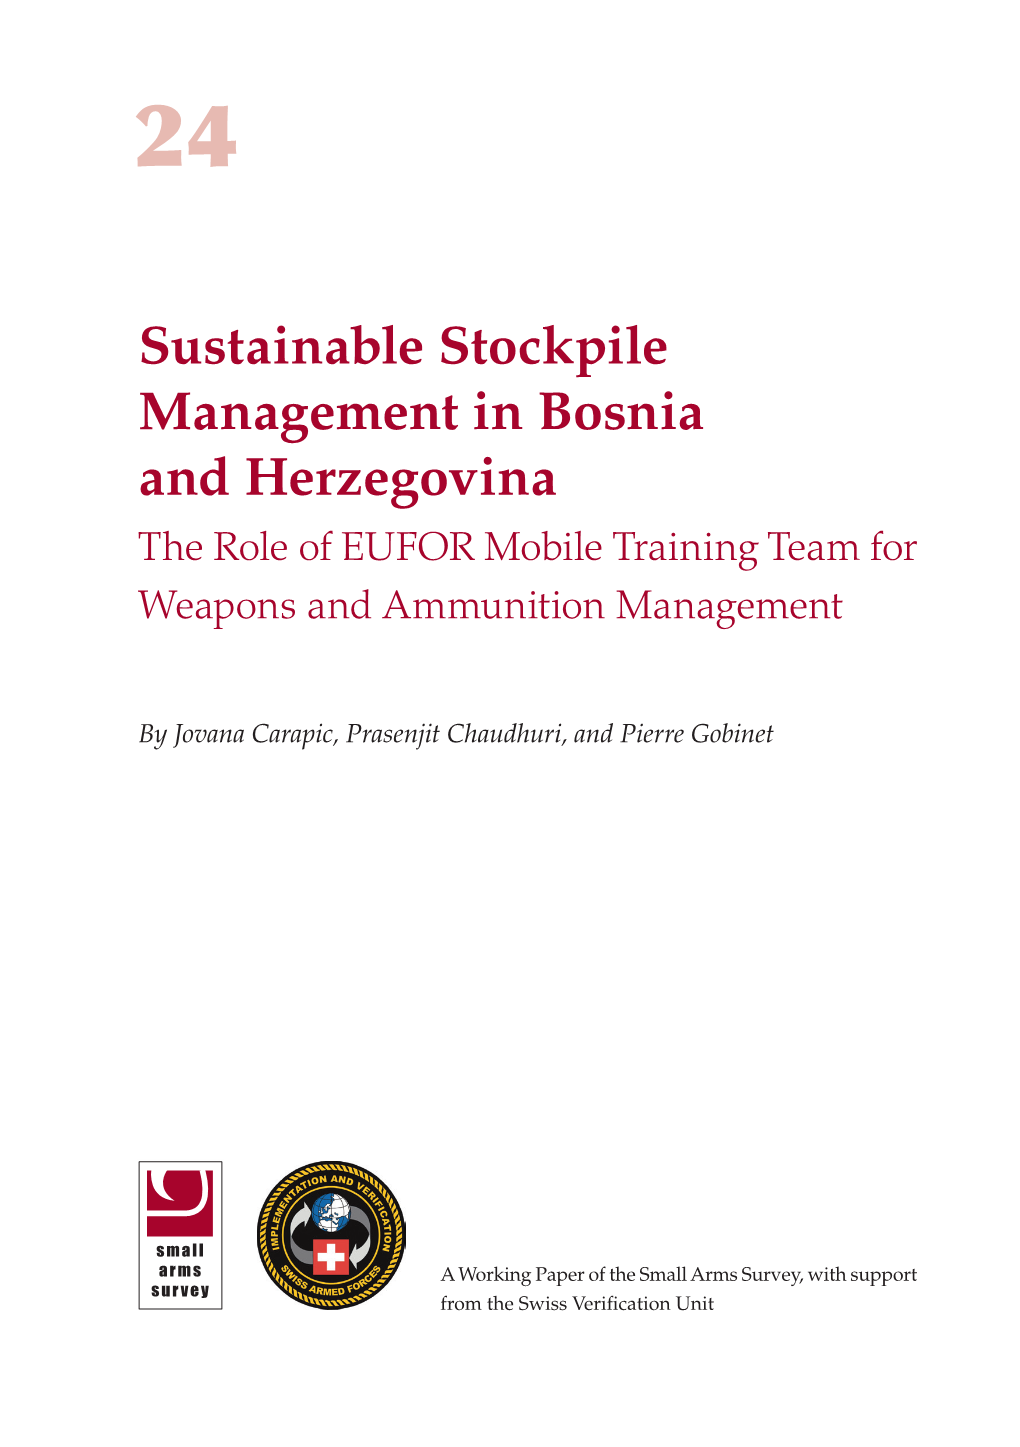 Sustainable Stockpile Management in Bosnia and Herzegovina the Role of EUFOR Mobile Training Team for Weapons and Ammunition Management